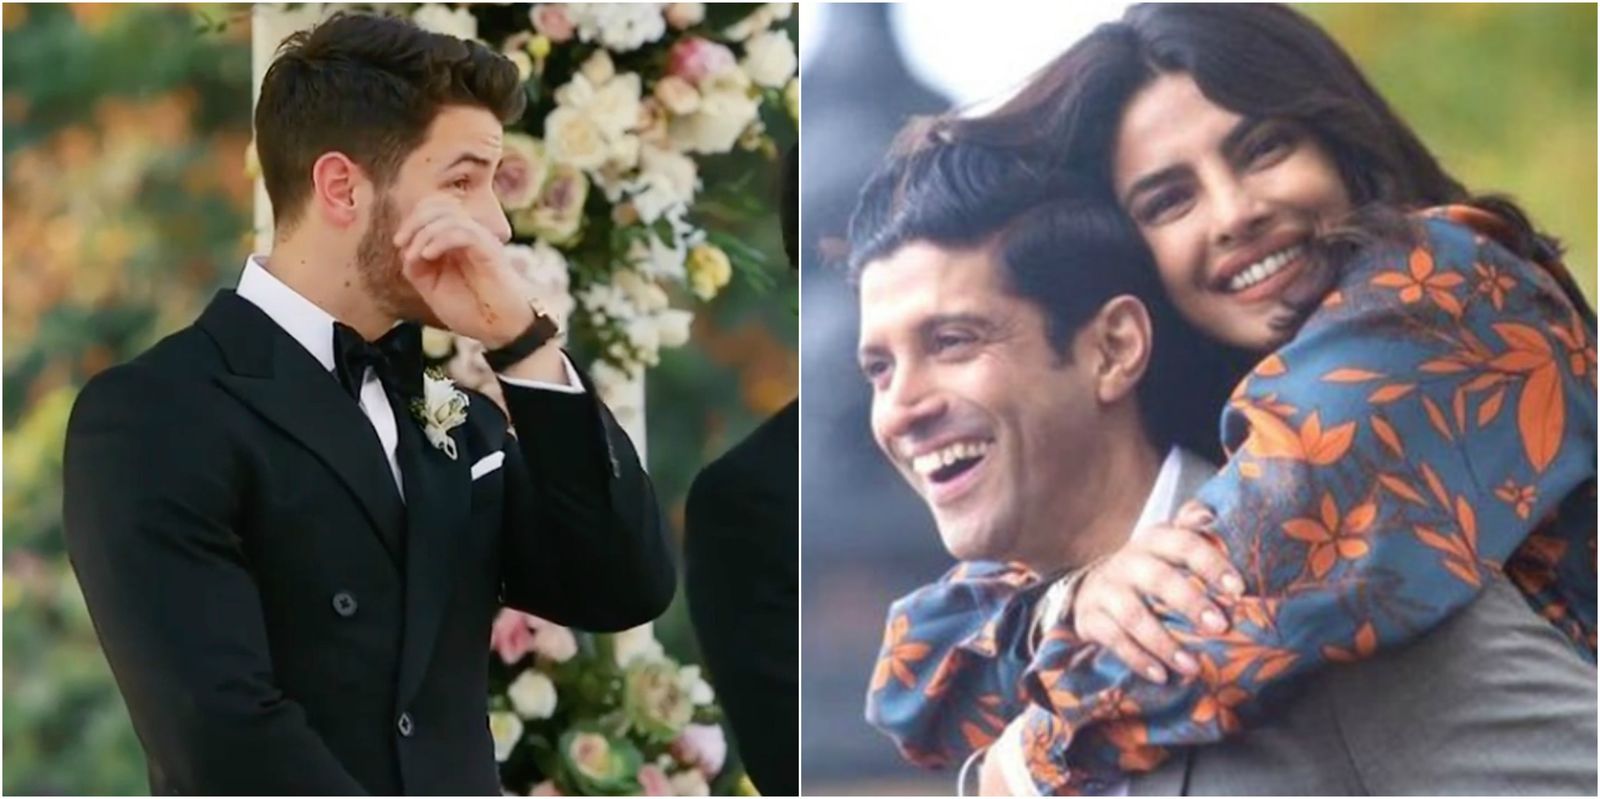 What Did Priyanka Chopra Do To Make Hubby Nick Jonas Cry? Find Out The Details